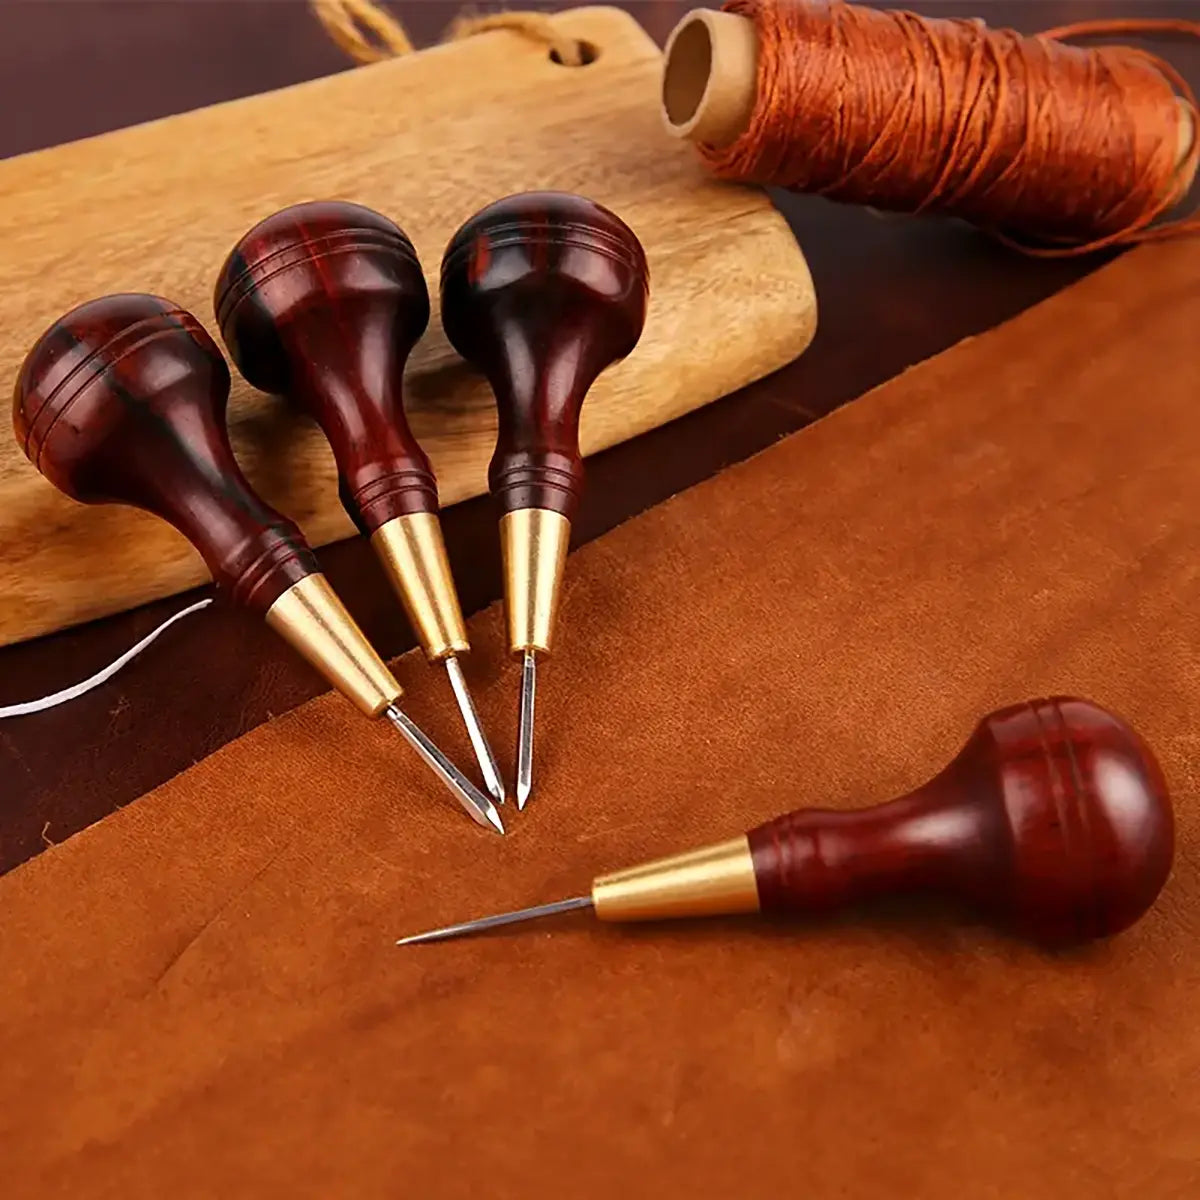 Gourd Shaped Diamond and Point Awls